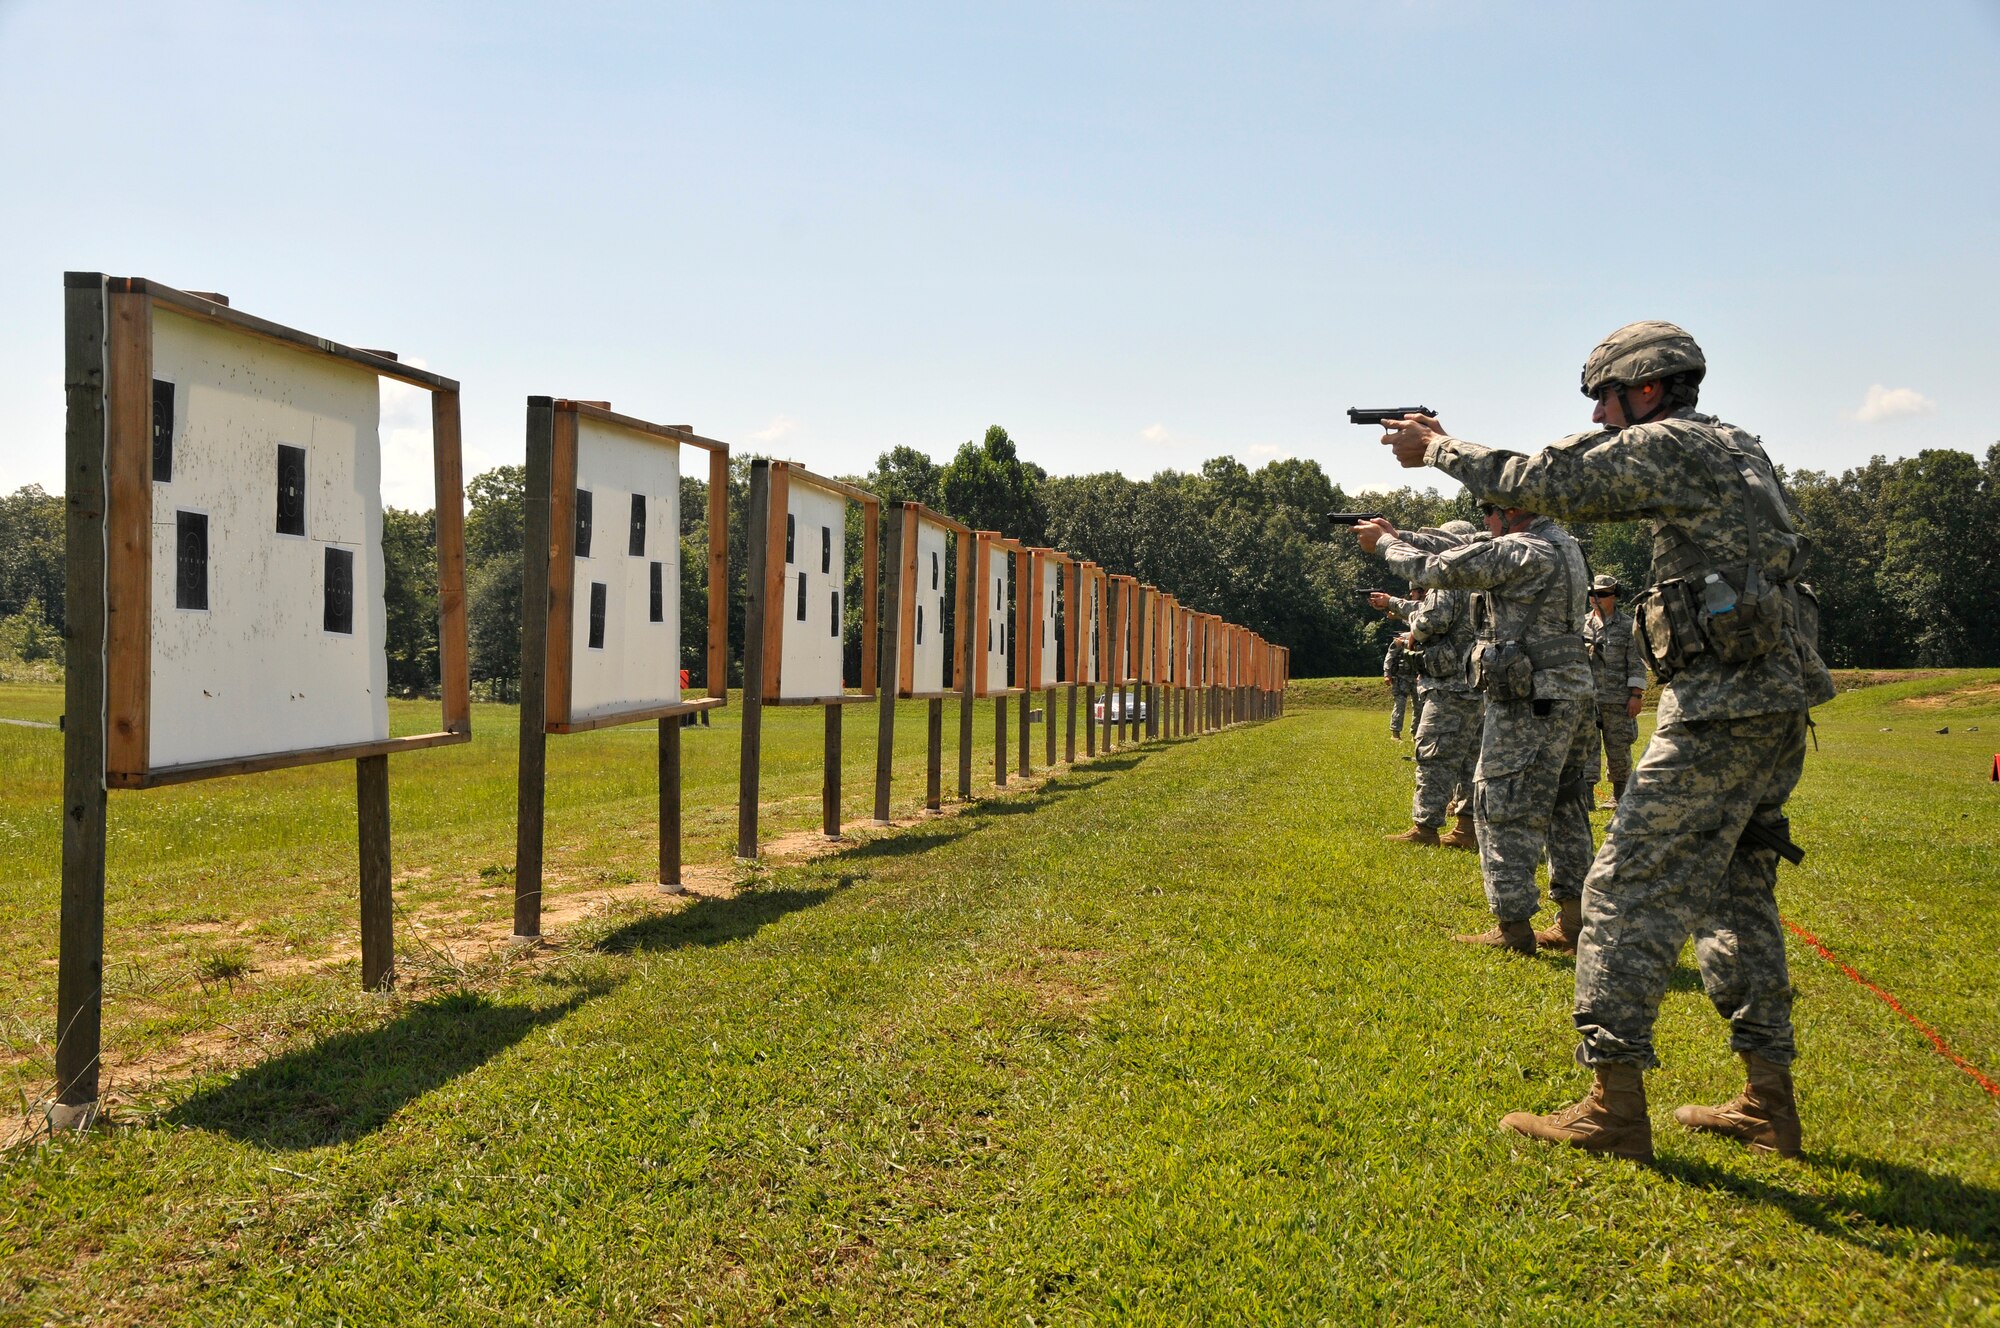 Members of the Tennessee Army and Air National Guard practice thier target acquisition skills with a Beretta M9 service pistol during a training session at the 2014 Tennessee Adjutant General Marksmanship Pistol Match in Tullahoma, TN on Aug 15. The Tennesee TAG Match is held anually to promote marksmanship skills in the Army and Air National Guard.  (U.S. Air National Guard photo by Master Sgt. Kendra M. Owenby, 134 ARW Public Affairs)